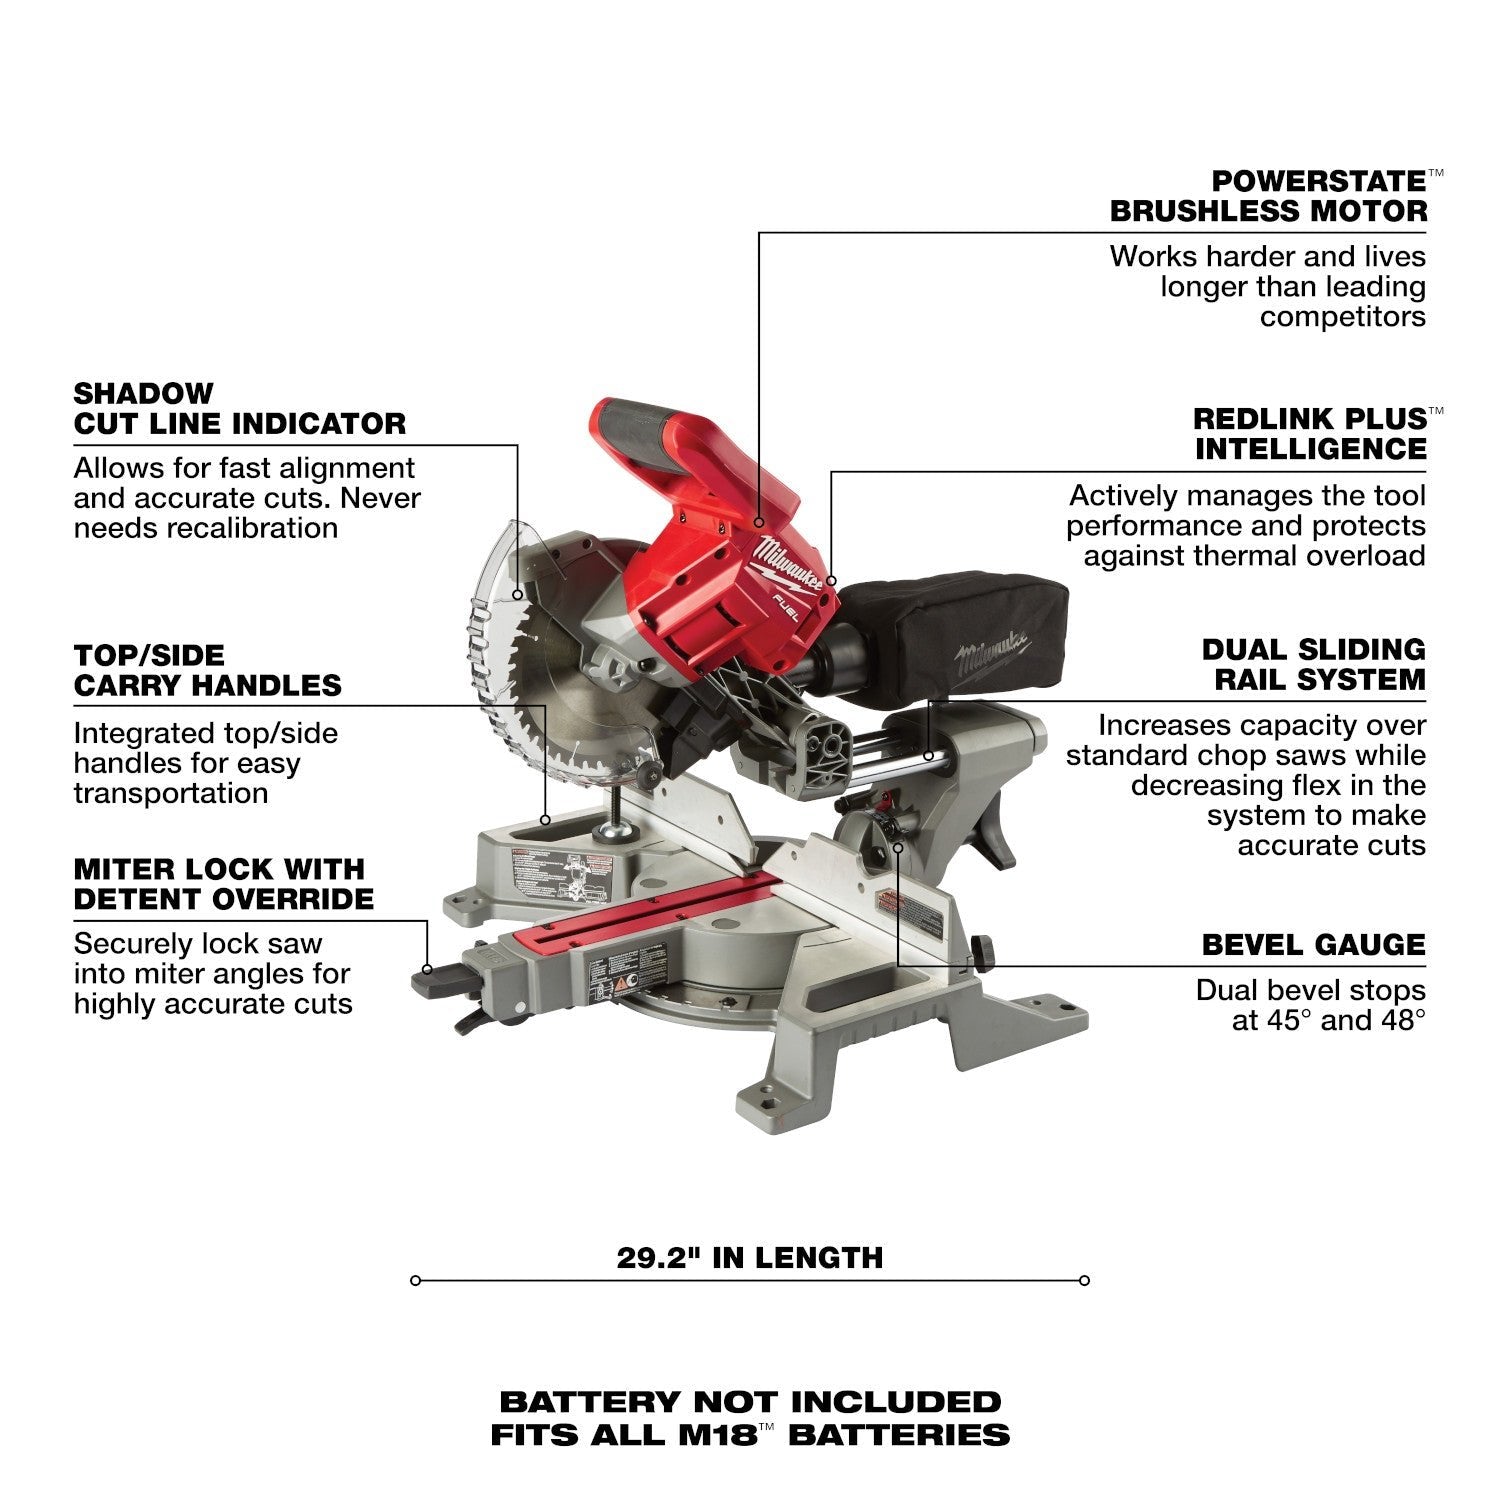 Milwaukee 2733-20 - M18 FUEL™ 7-1/4” Dual Bevel Sliding Compound Miter Saw (Tool Only)